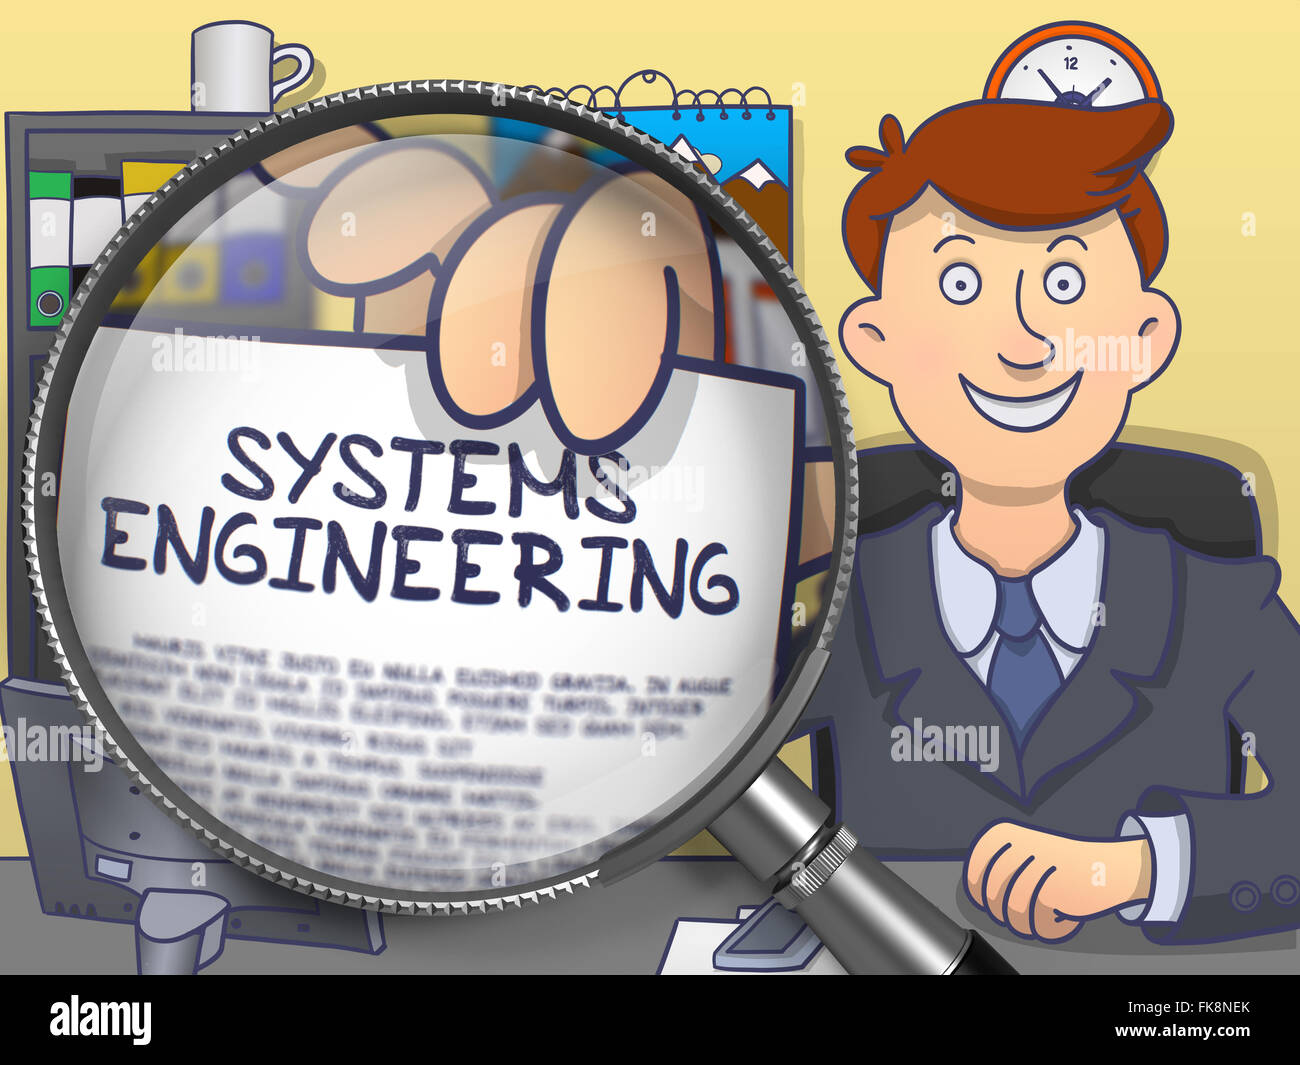 Systems Engineering through Magnifying Glass. Doodle Style. Stock Photo